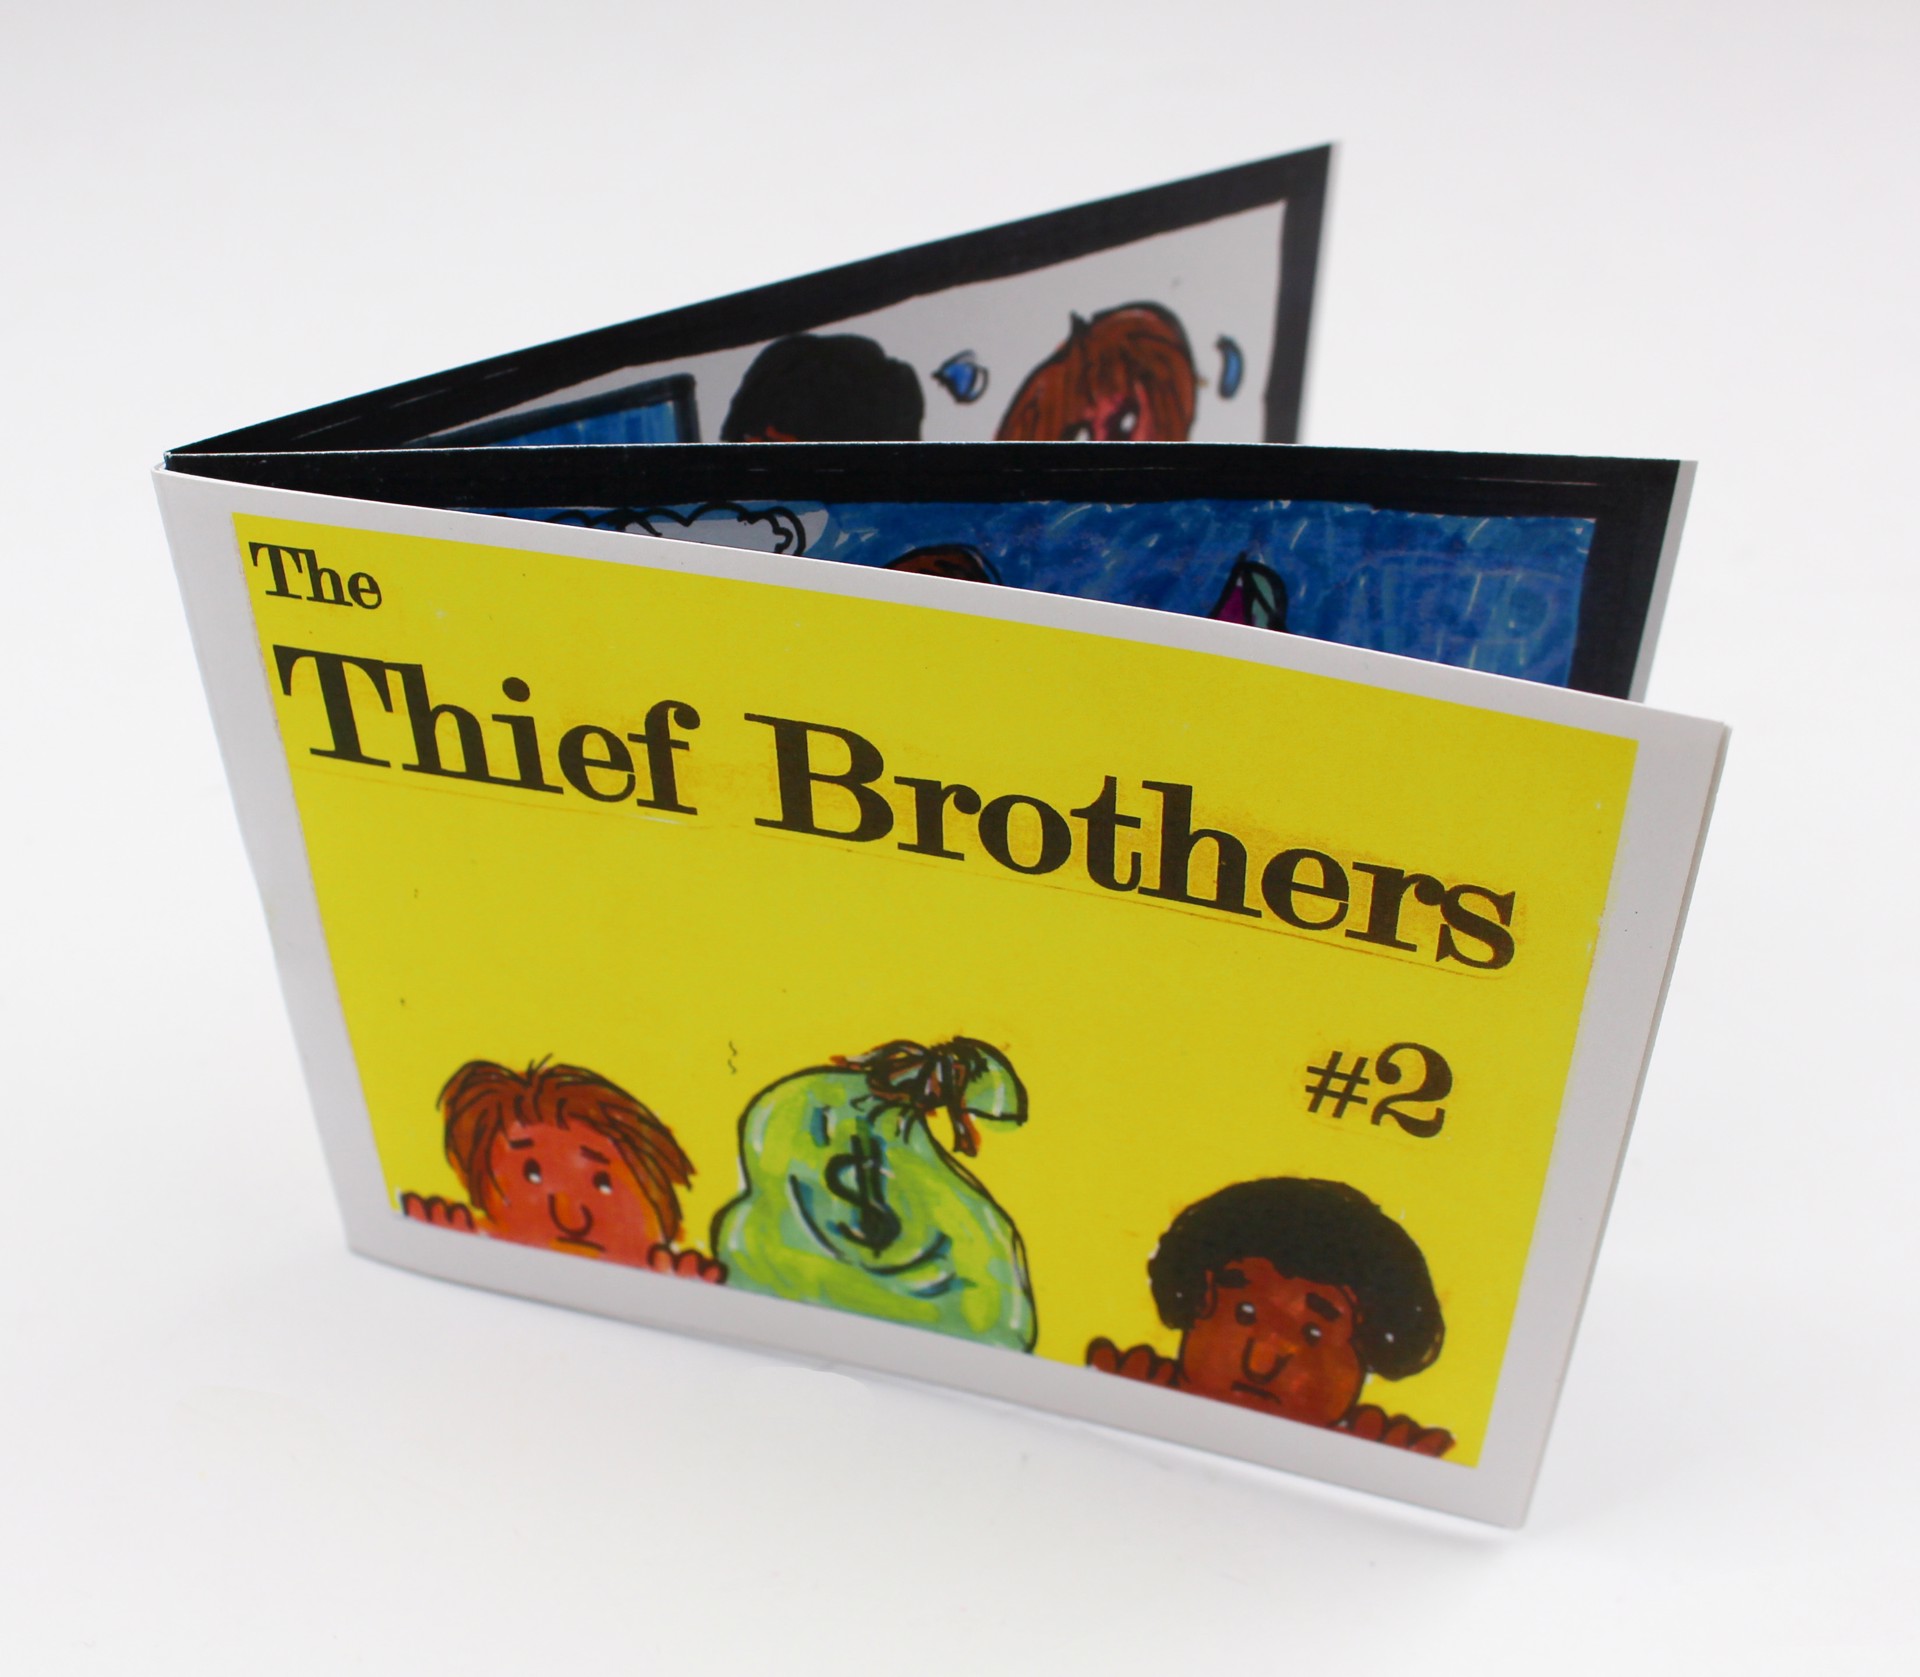 The Thief Brothers #2: A Mini-Book (In Color) by Nonja Tiller